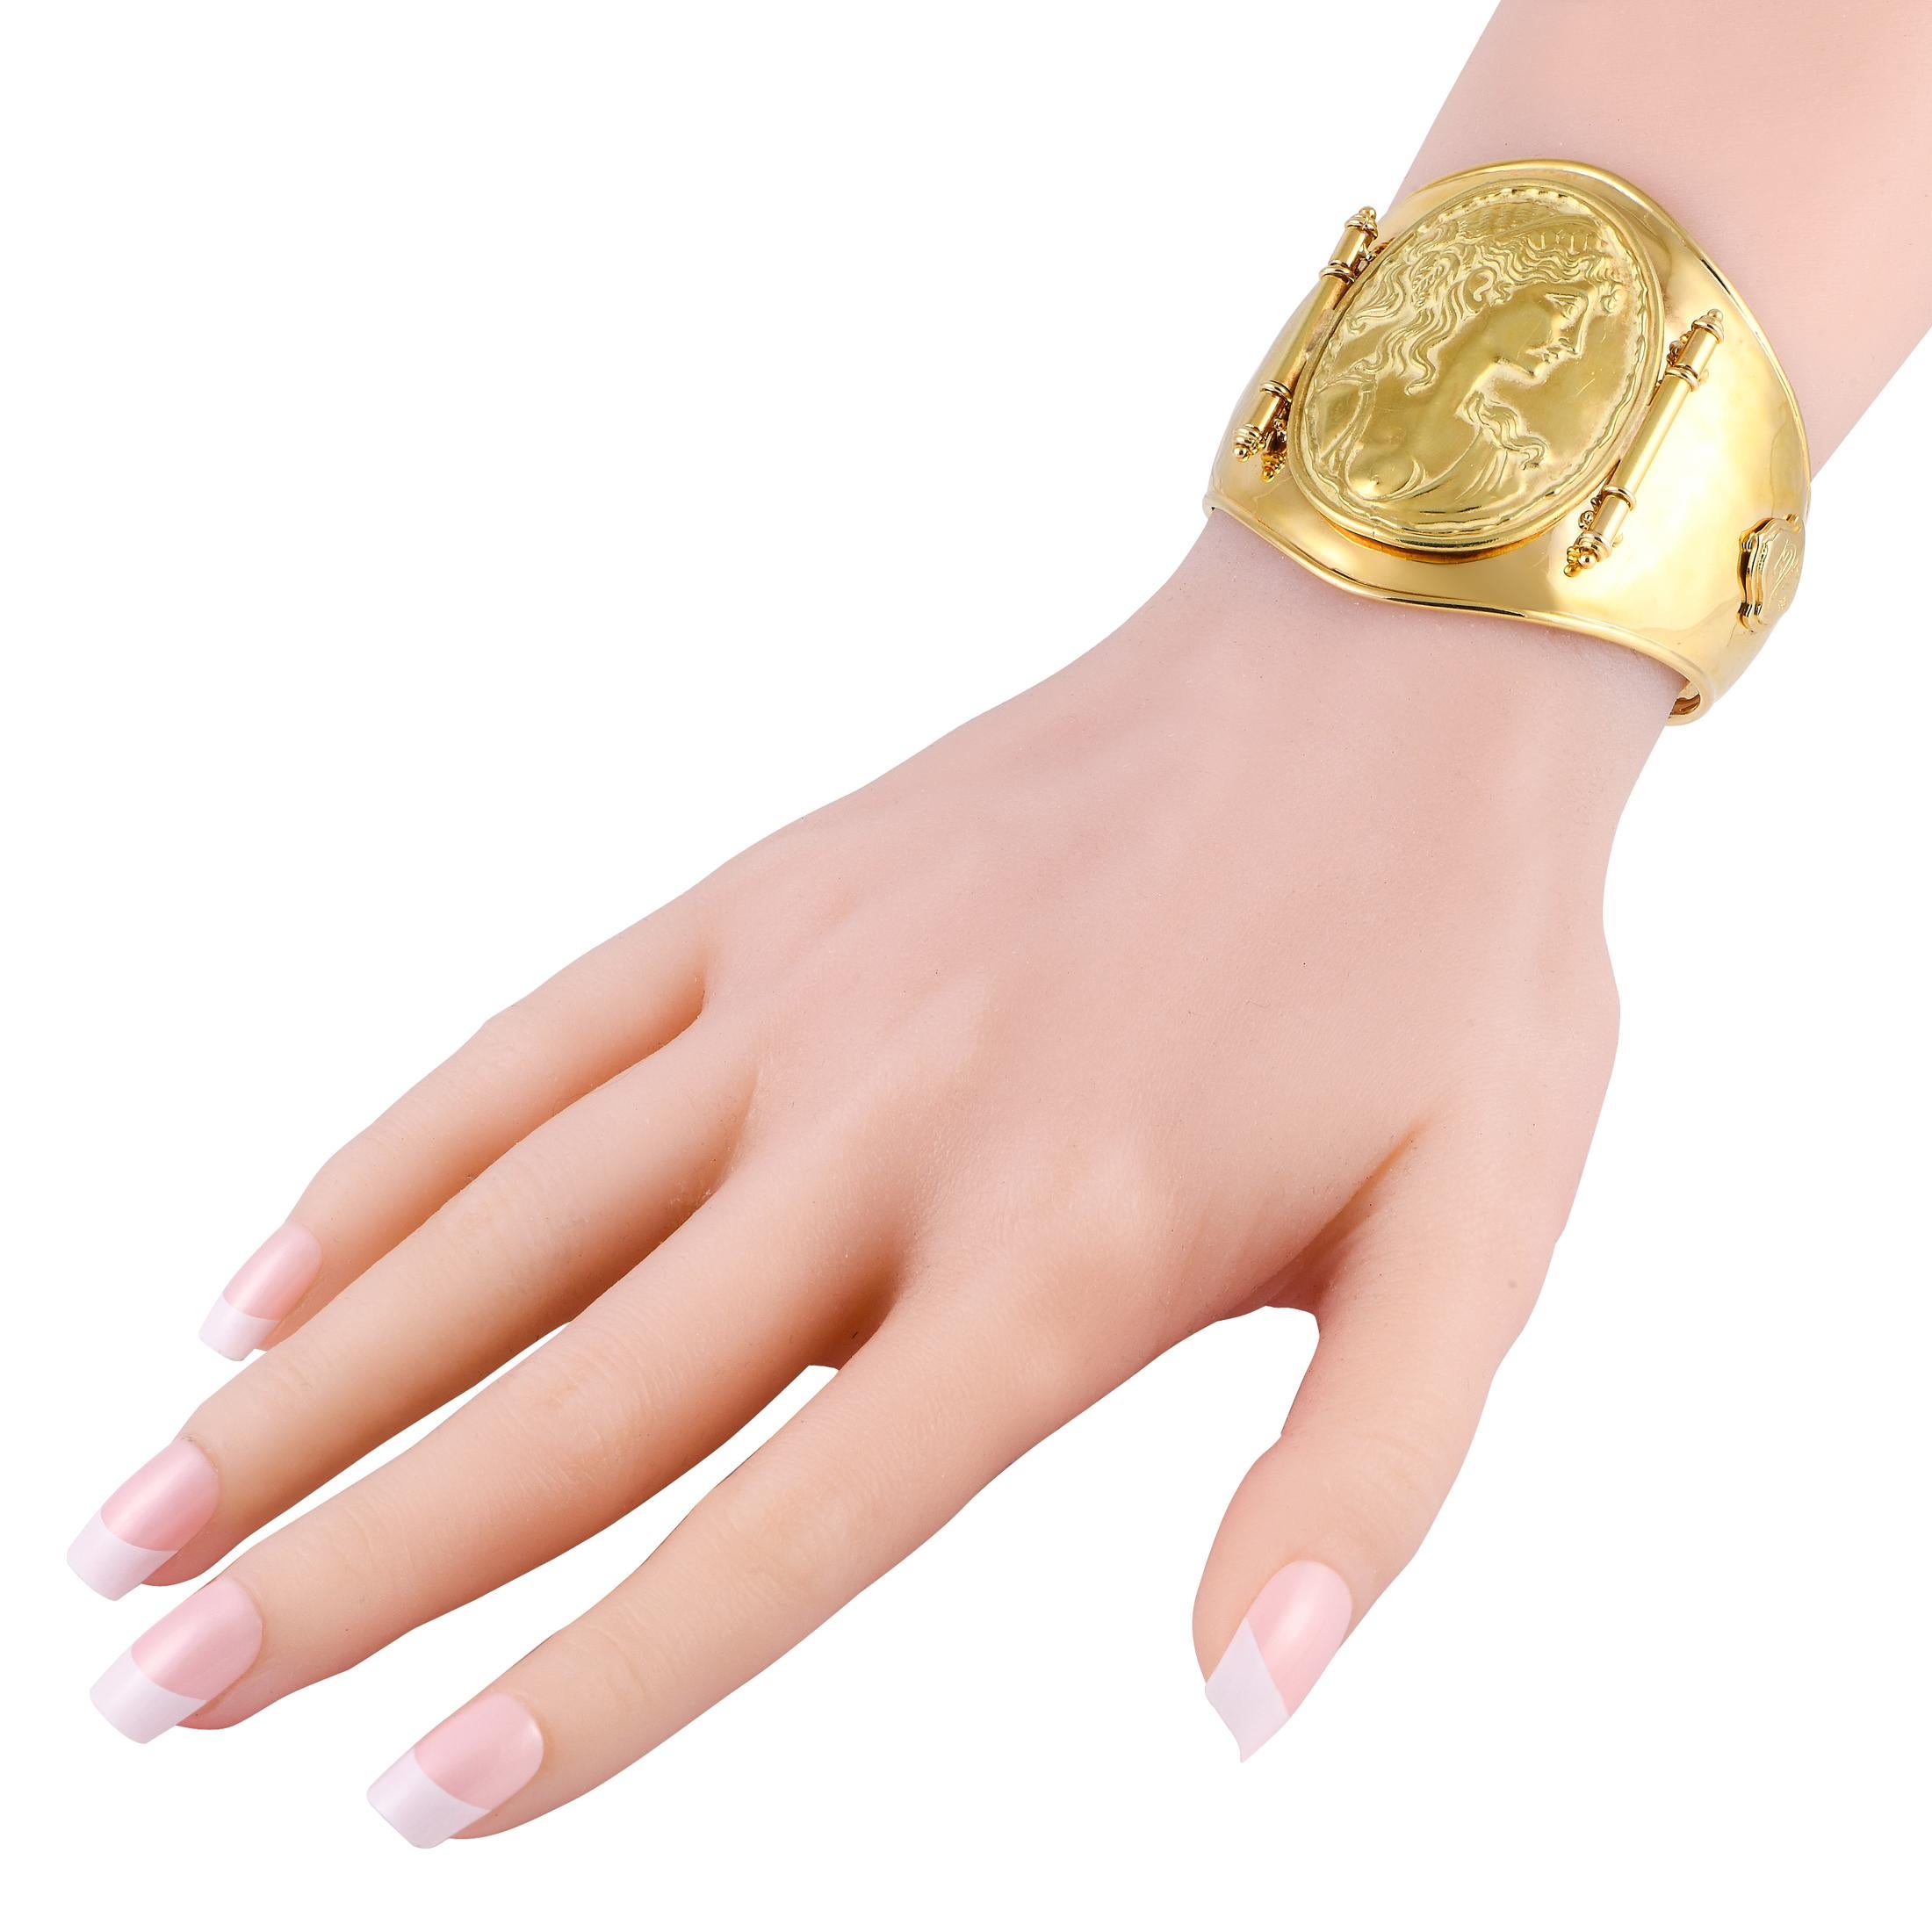 Unleash the goddess in you with this shiny gold cuff bracelet expertly crafted by Italian jewelry manufacturer Ivo Spina. This wrist accessory is fashioned from 18K yellow gold and has rounded edges and a high polish finish. On its center is an oval